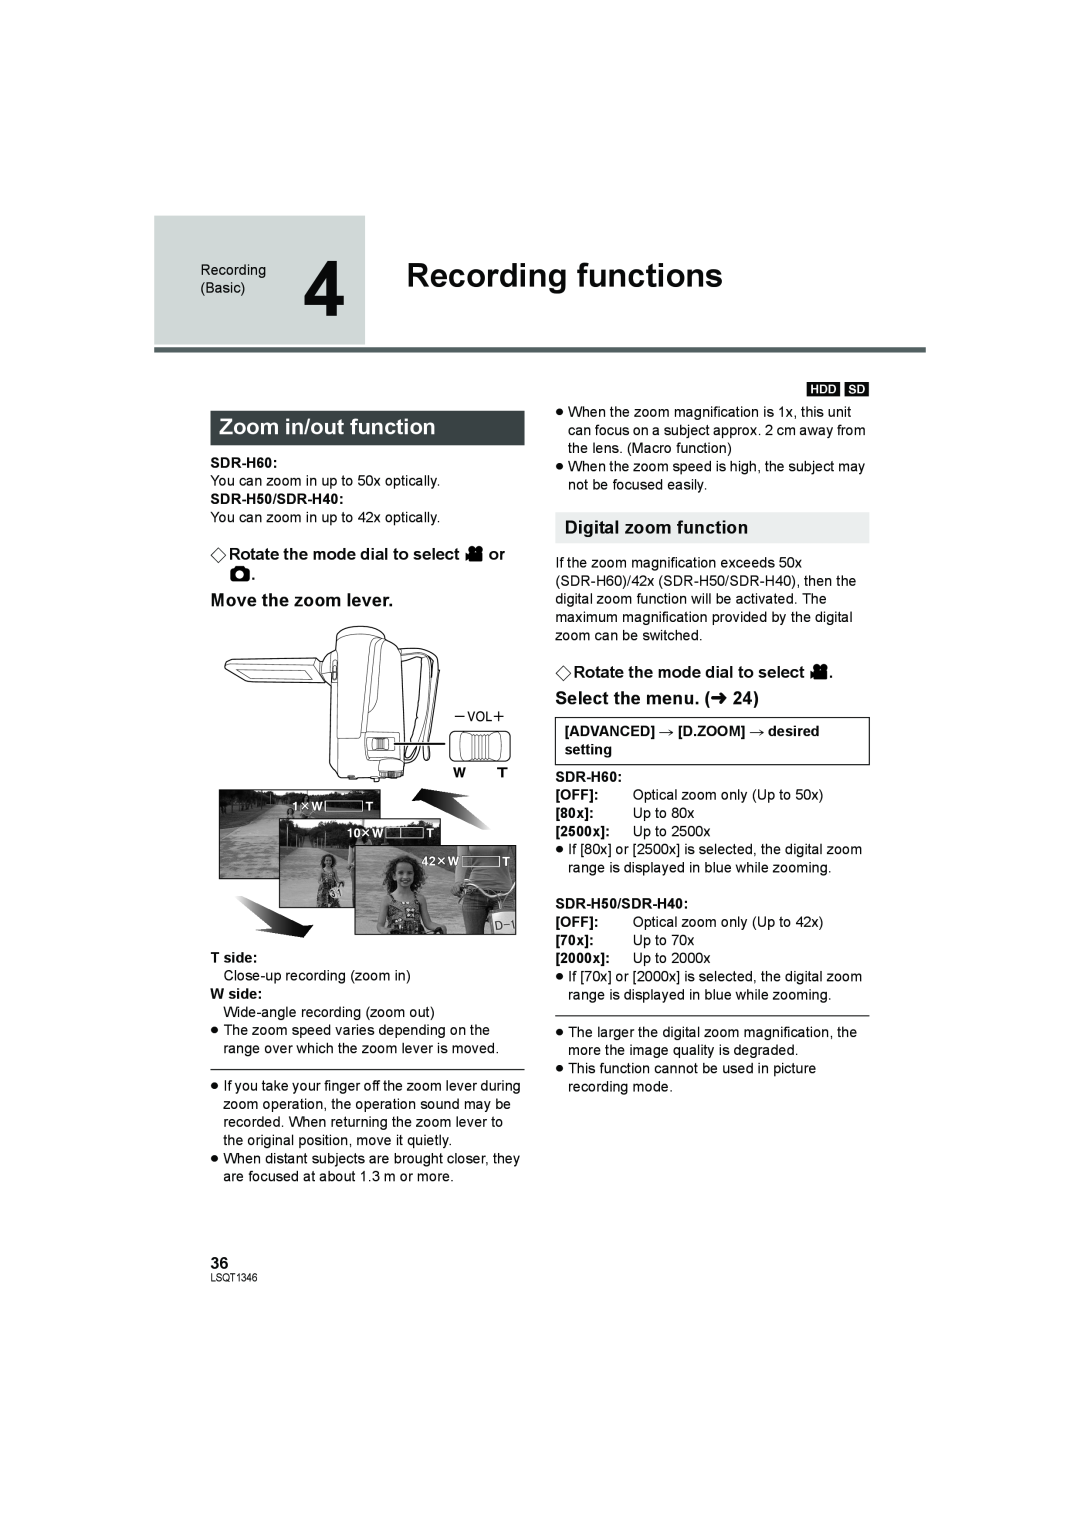 Panasonic SDR-H50 Recording functions, Zoom in/out function, Move the zoom lever, Digital zoom function, SDR-H60, T side 